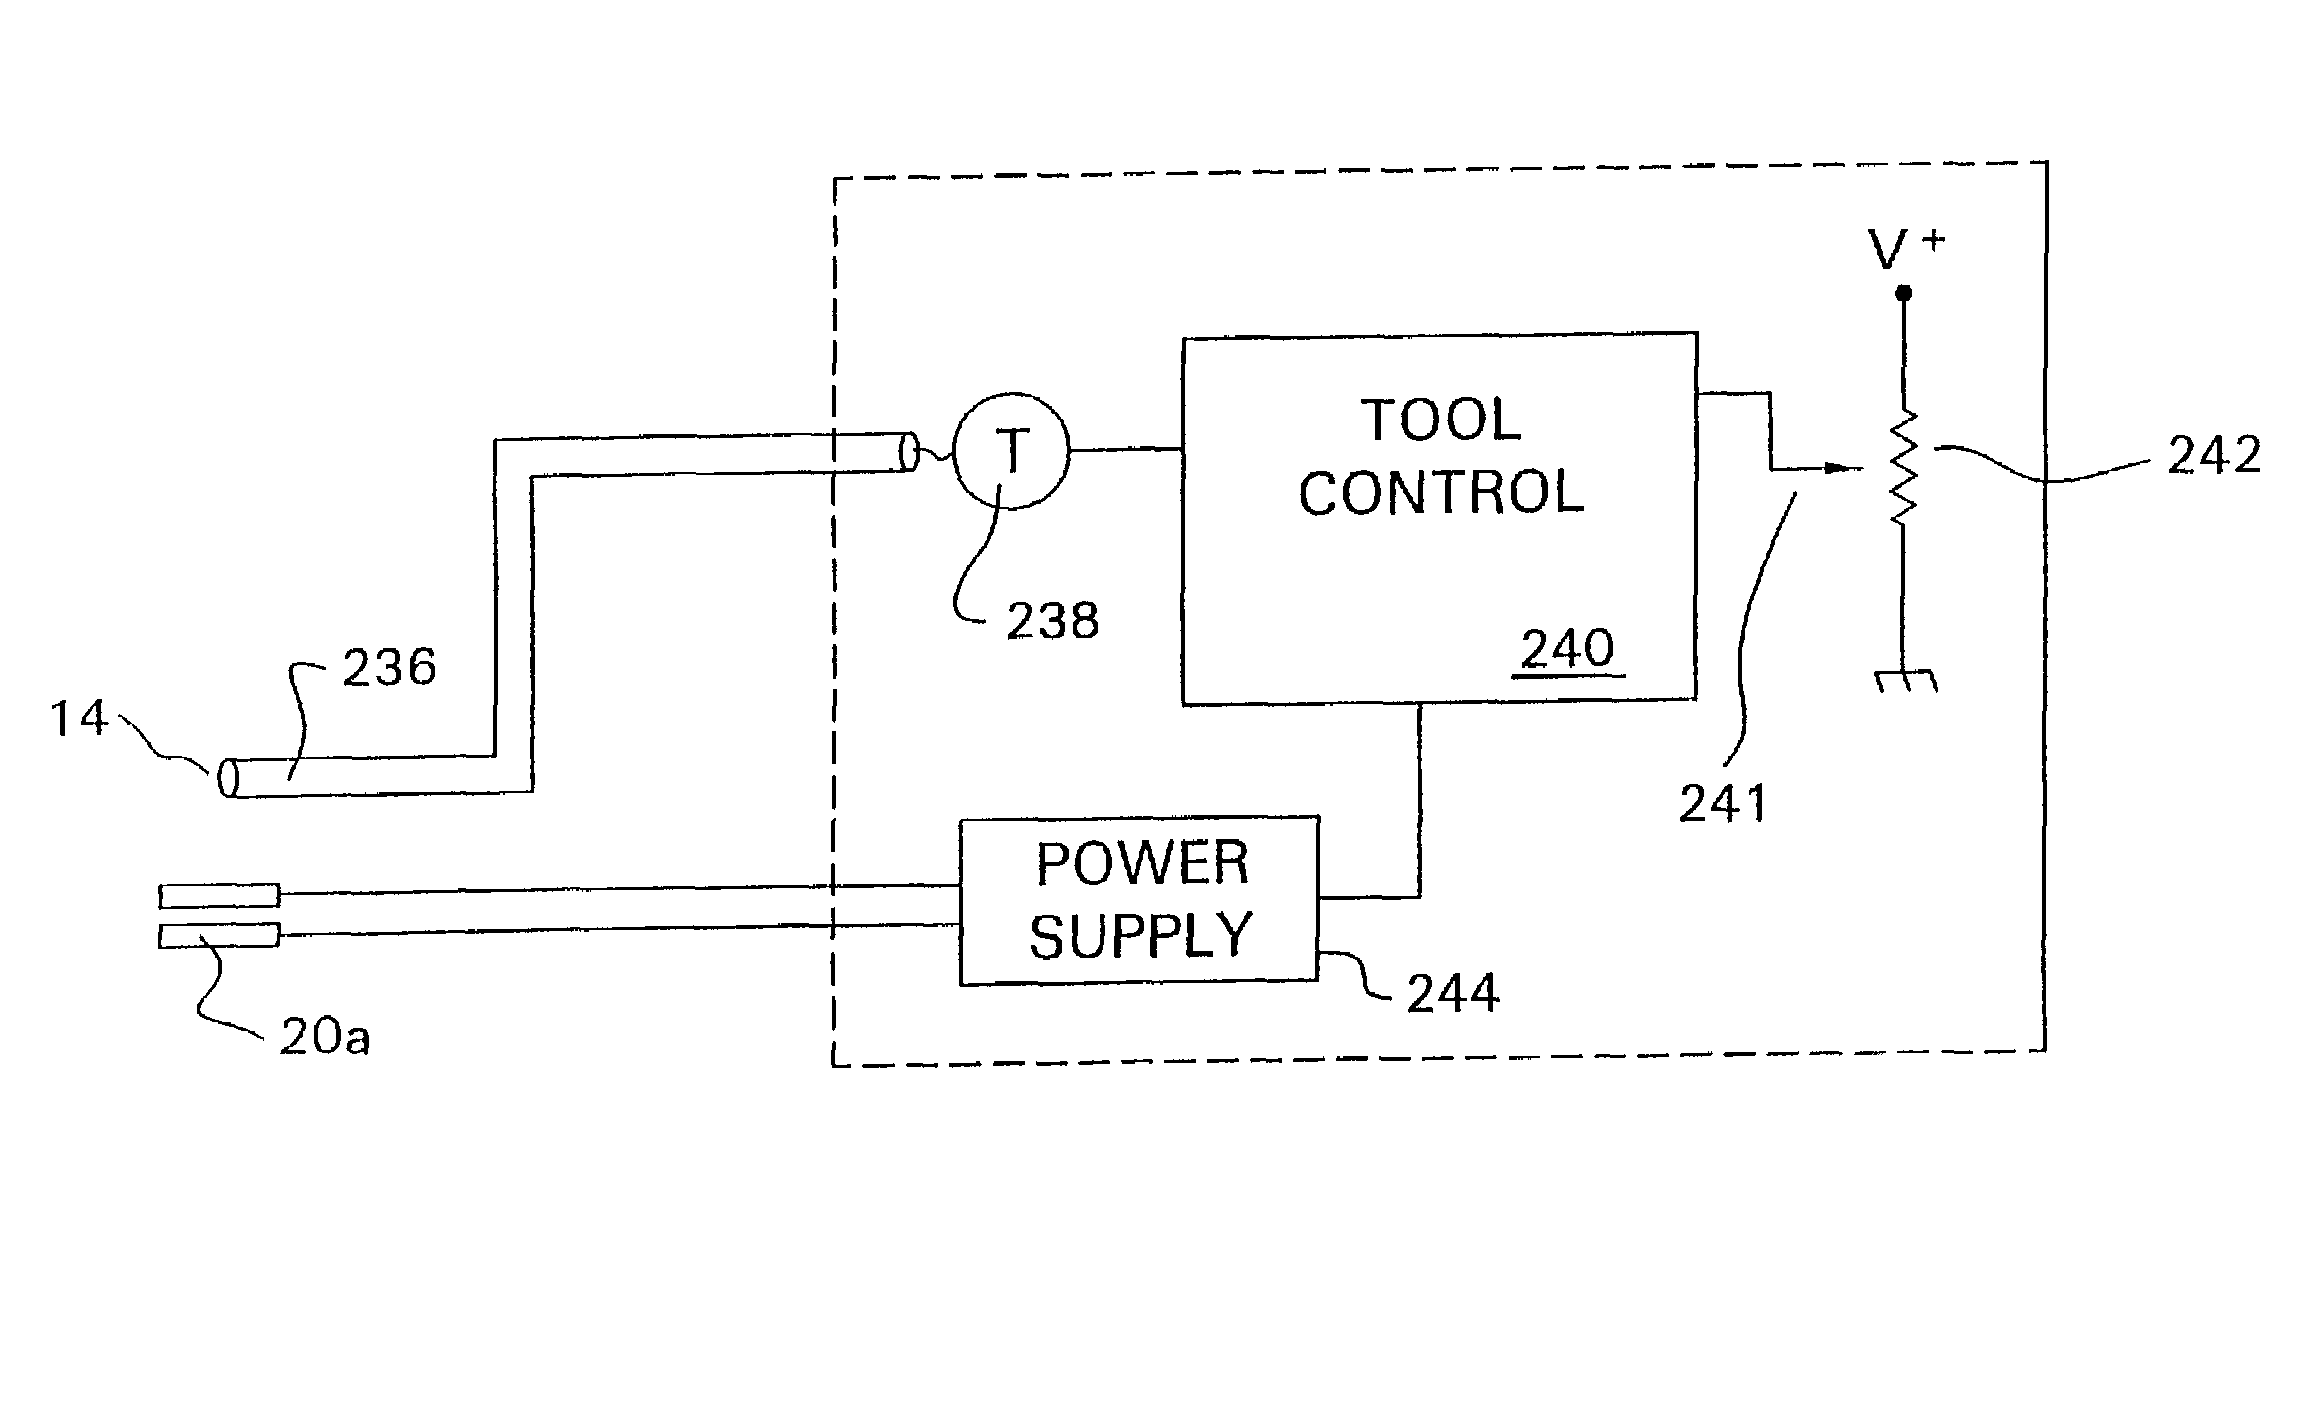 System and method for regulating an amount of thermal energy generated by an electrosurgical tool